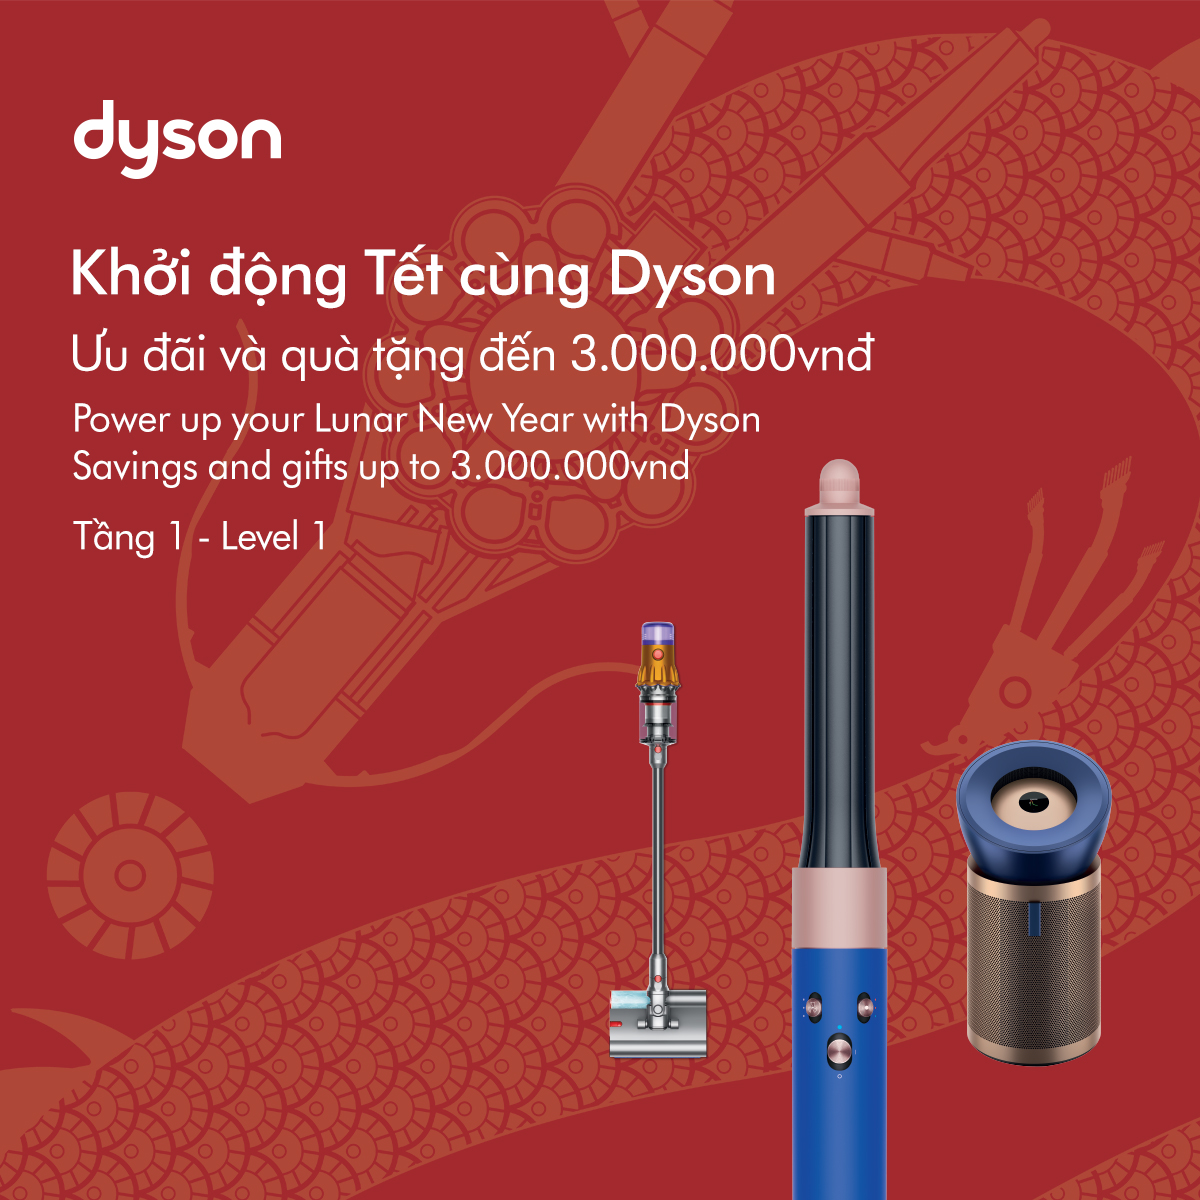 🎁 KICK OFF THE LUNAR NEW YEAR WITH DYSON - SAVINGS GIFTS UP TO VND 3,000,000 🧧🎁